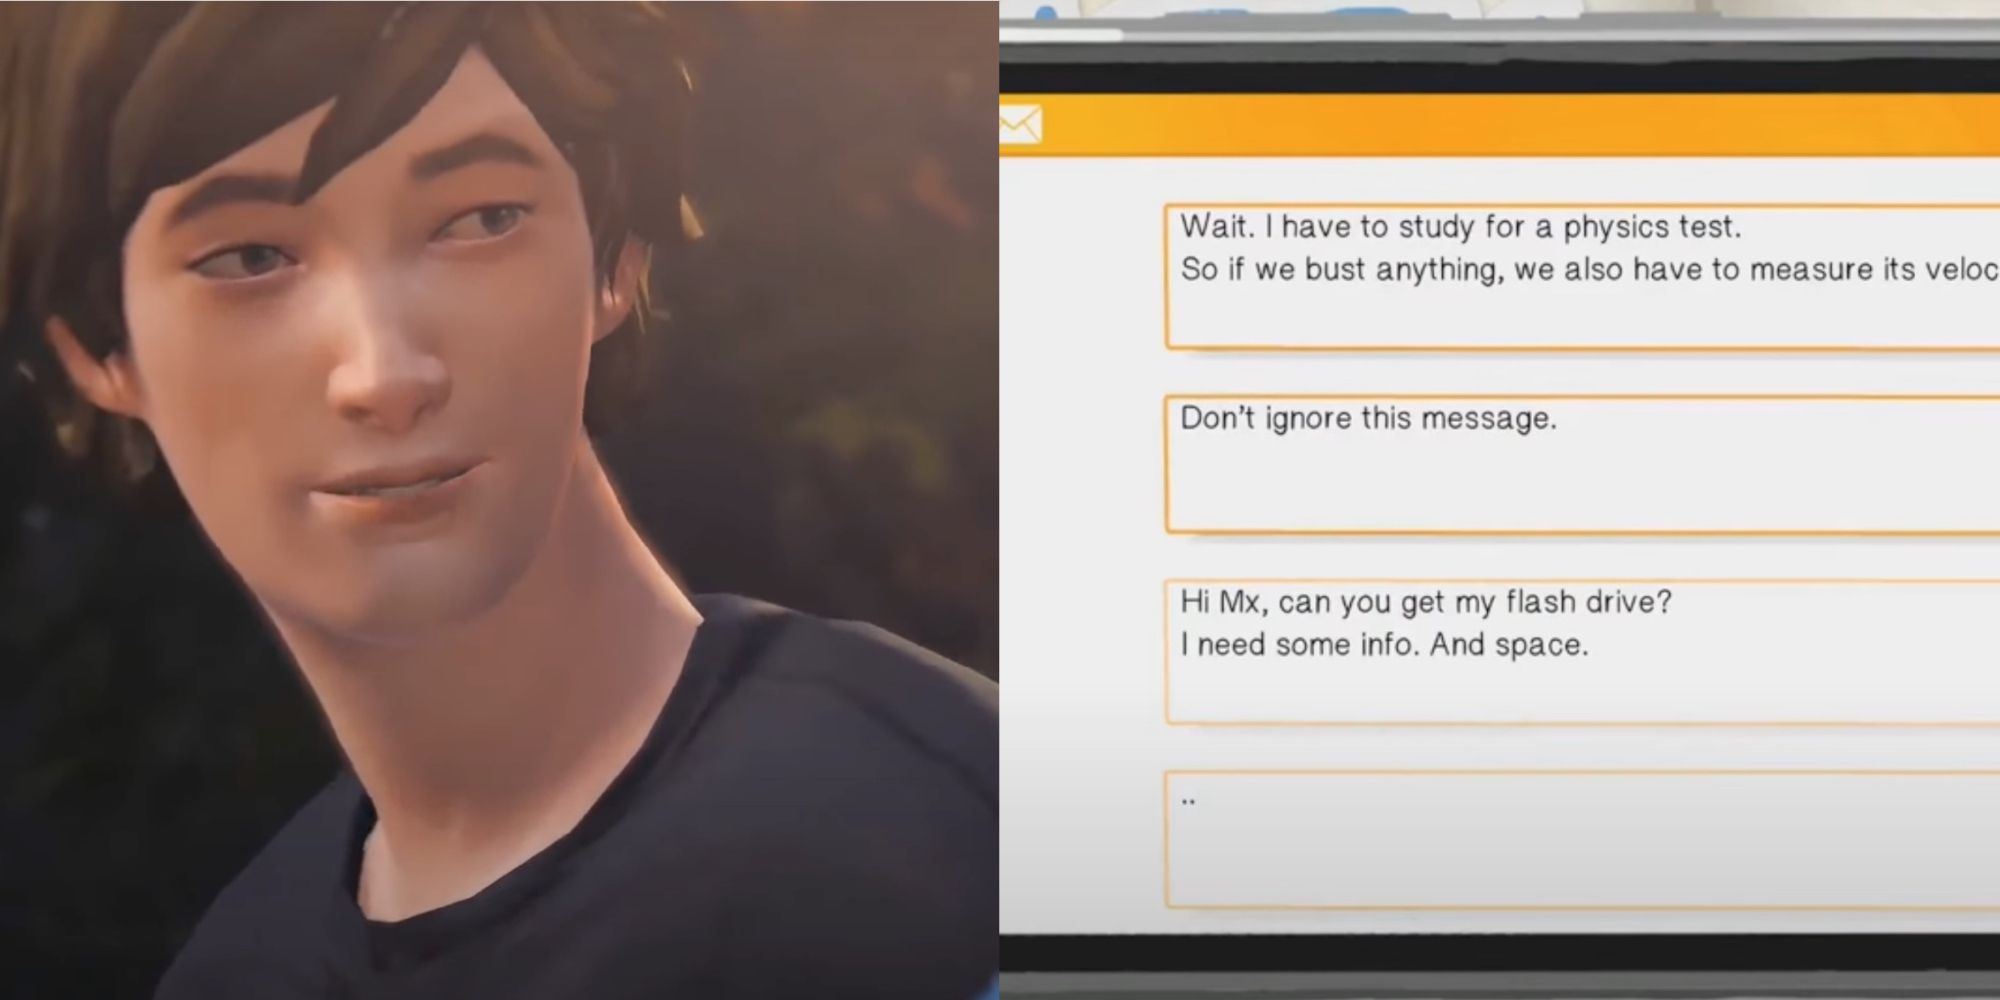 Life Is Strange Most Heartwarming Moments: Max and Warren texting each other.